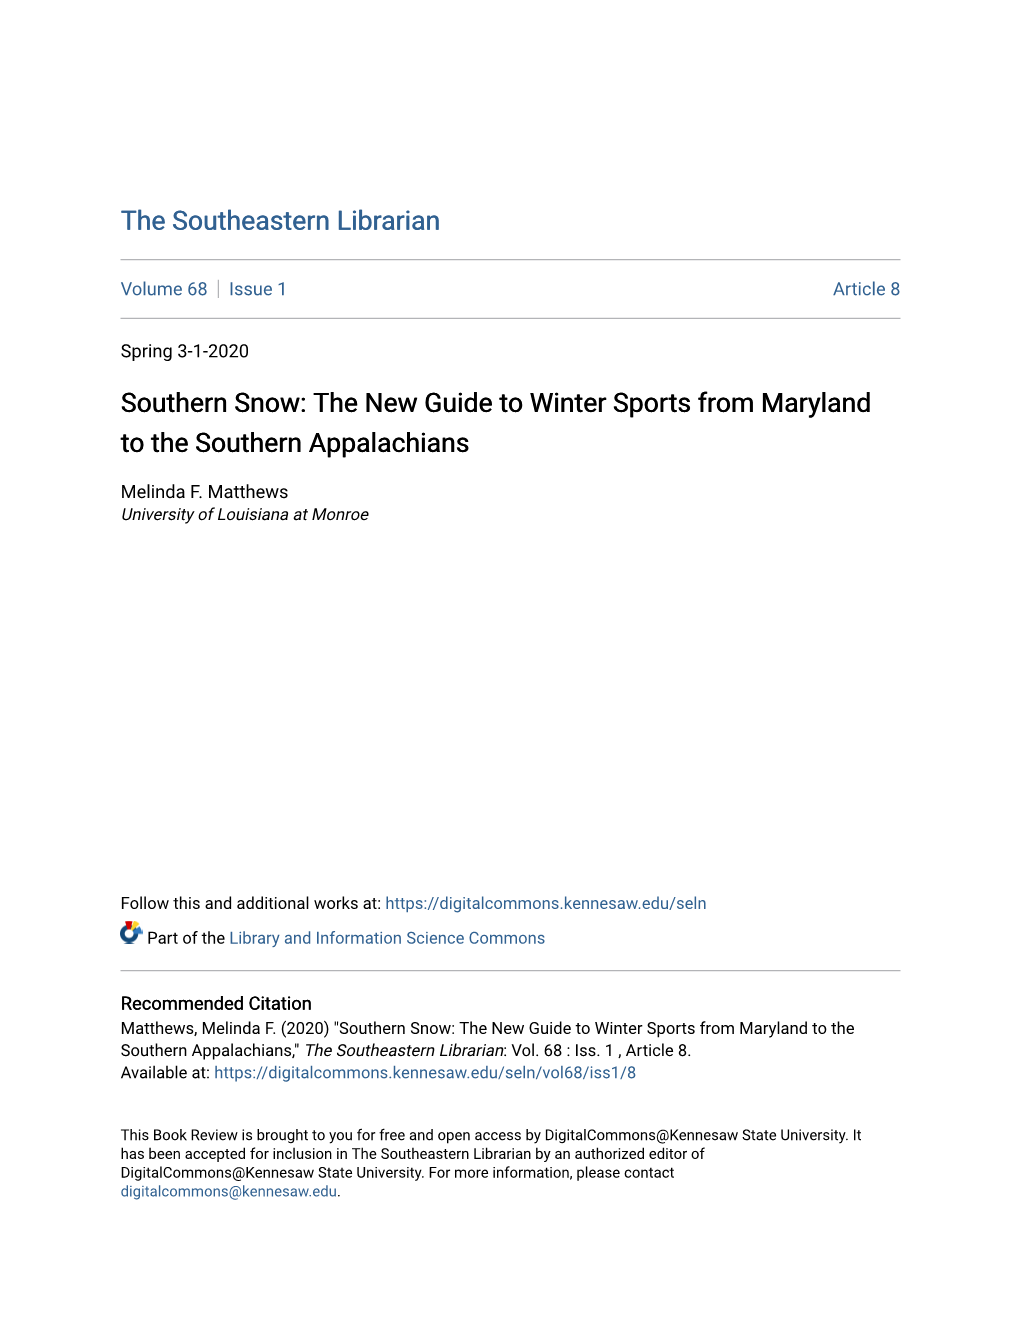 Southern Snow: the New Guide to Winter Sports from Maryland to the Southern Appalachians